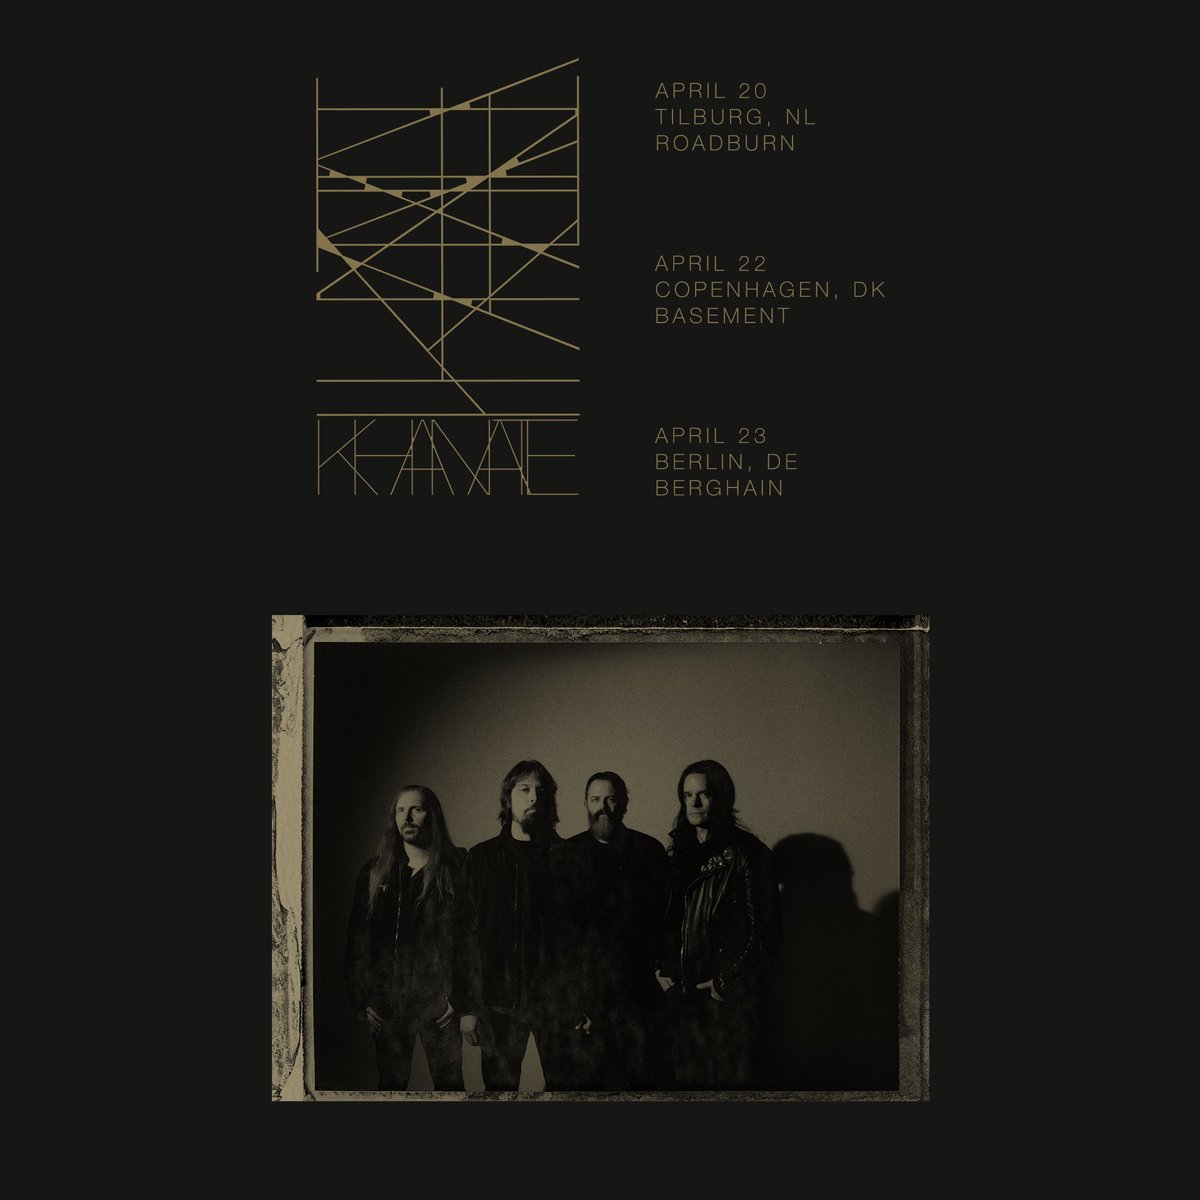 Following Khanate's main stage performance at @roadburnfest we play two headline shows. 4/22 in Copenhagen at Basement - less than 10 tix remain. 4/23 in Berlin at Berghain - ltd tix remain. There are no other performances currently planned, get tickets before they’re gone.